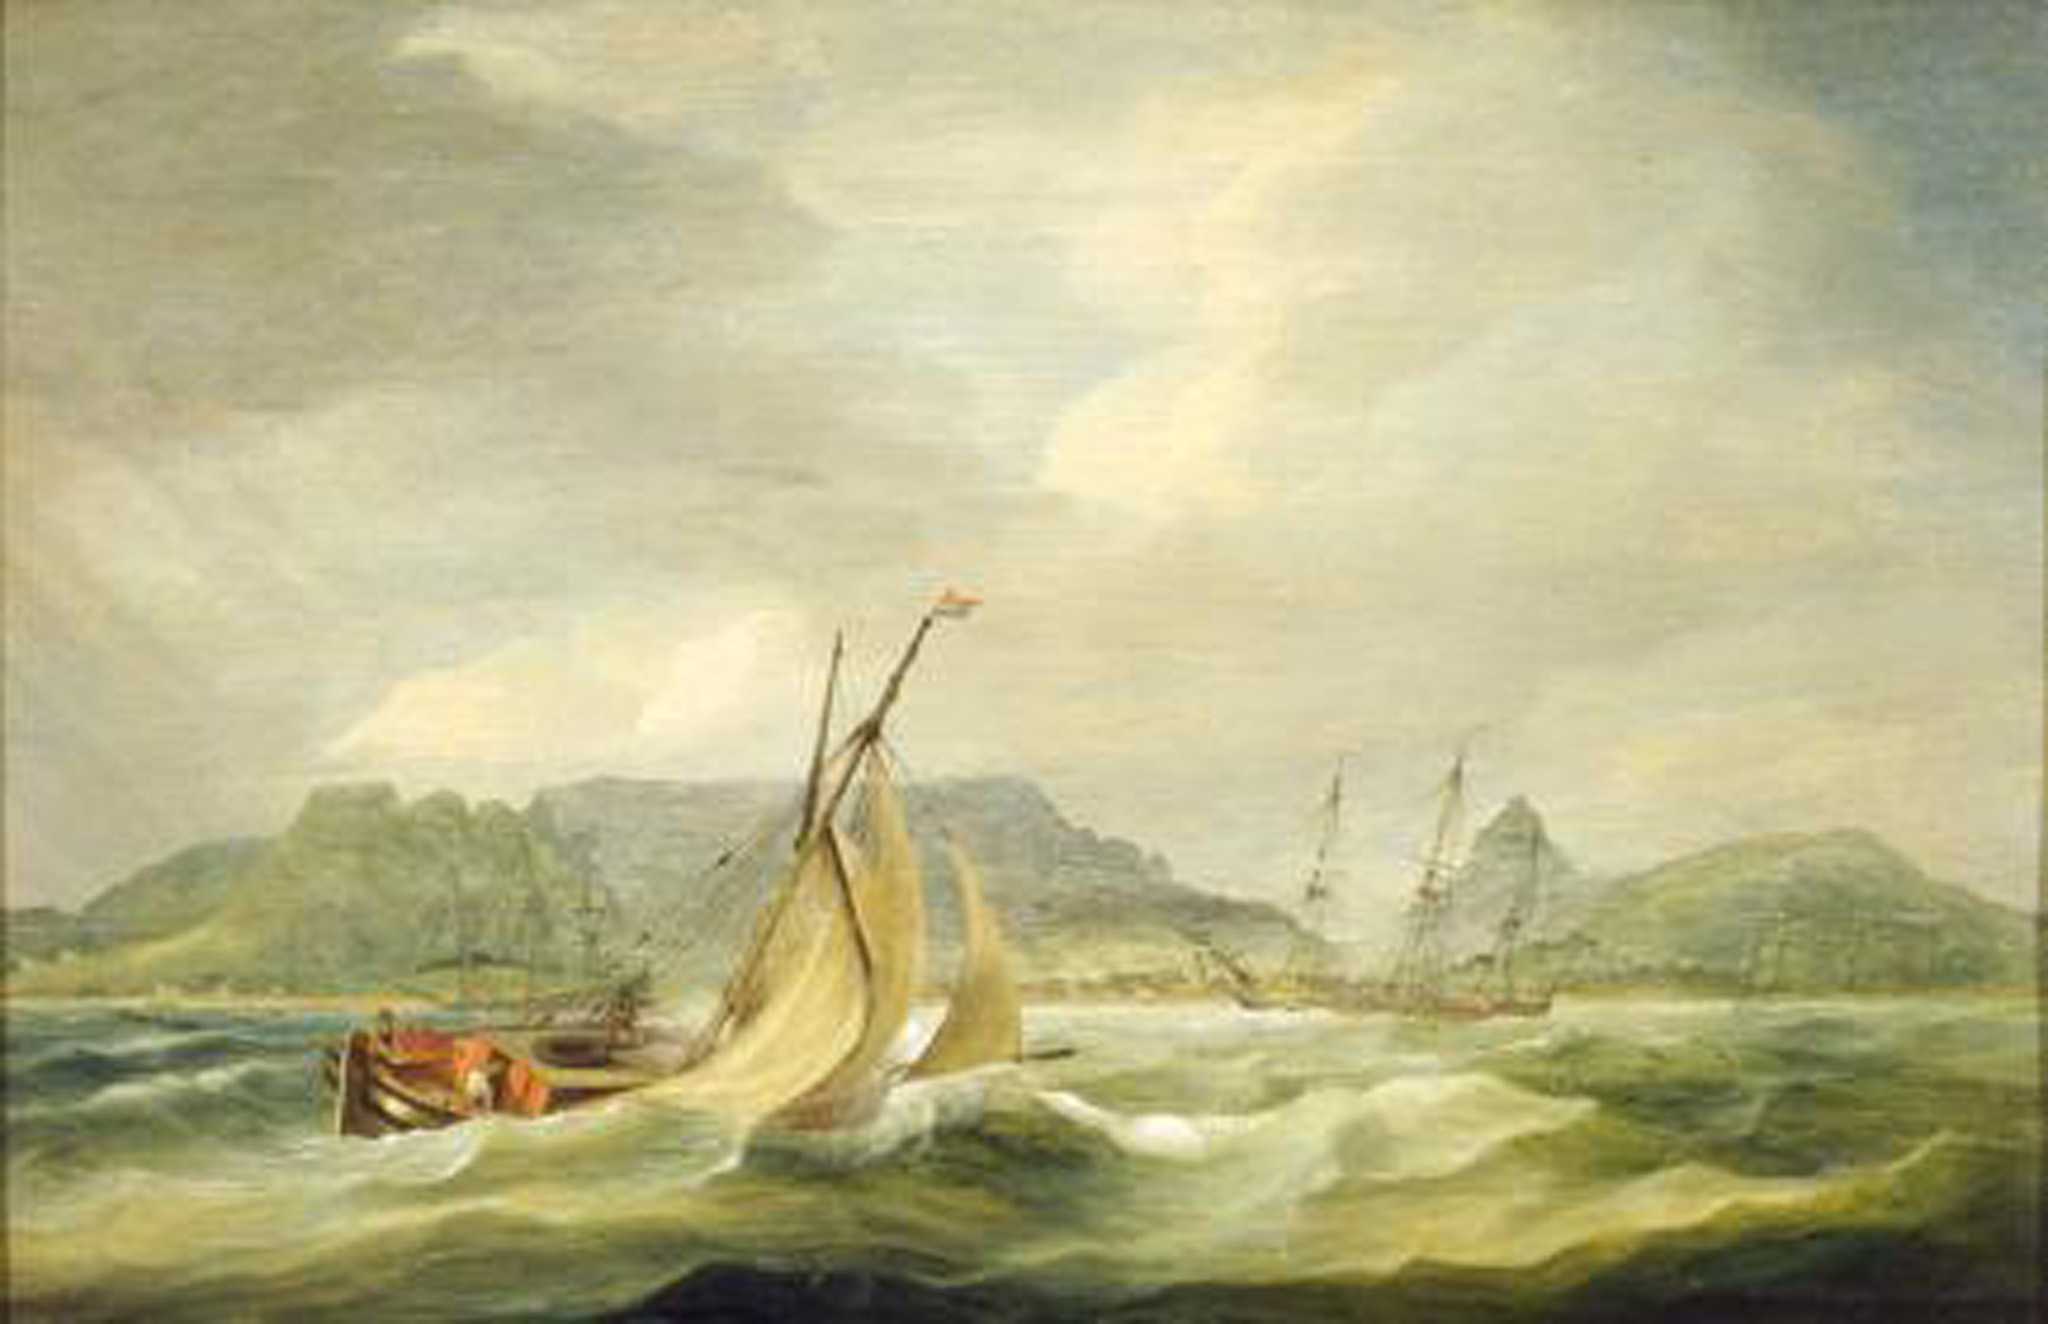 Color illustration of the Cape of Good Hope